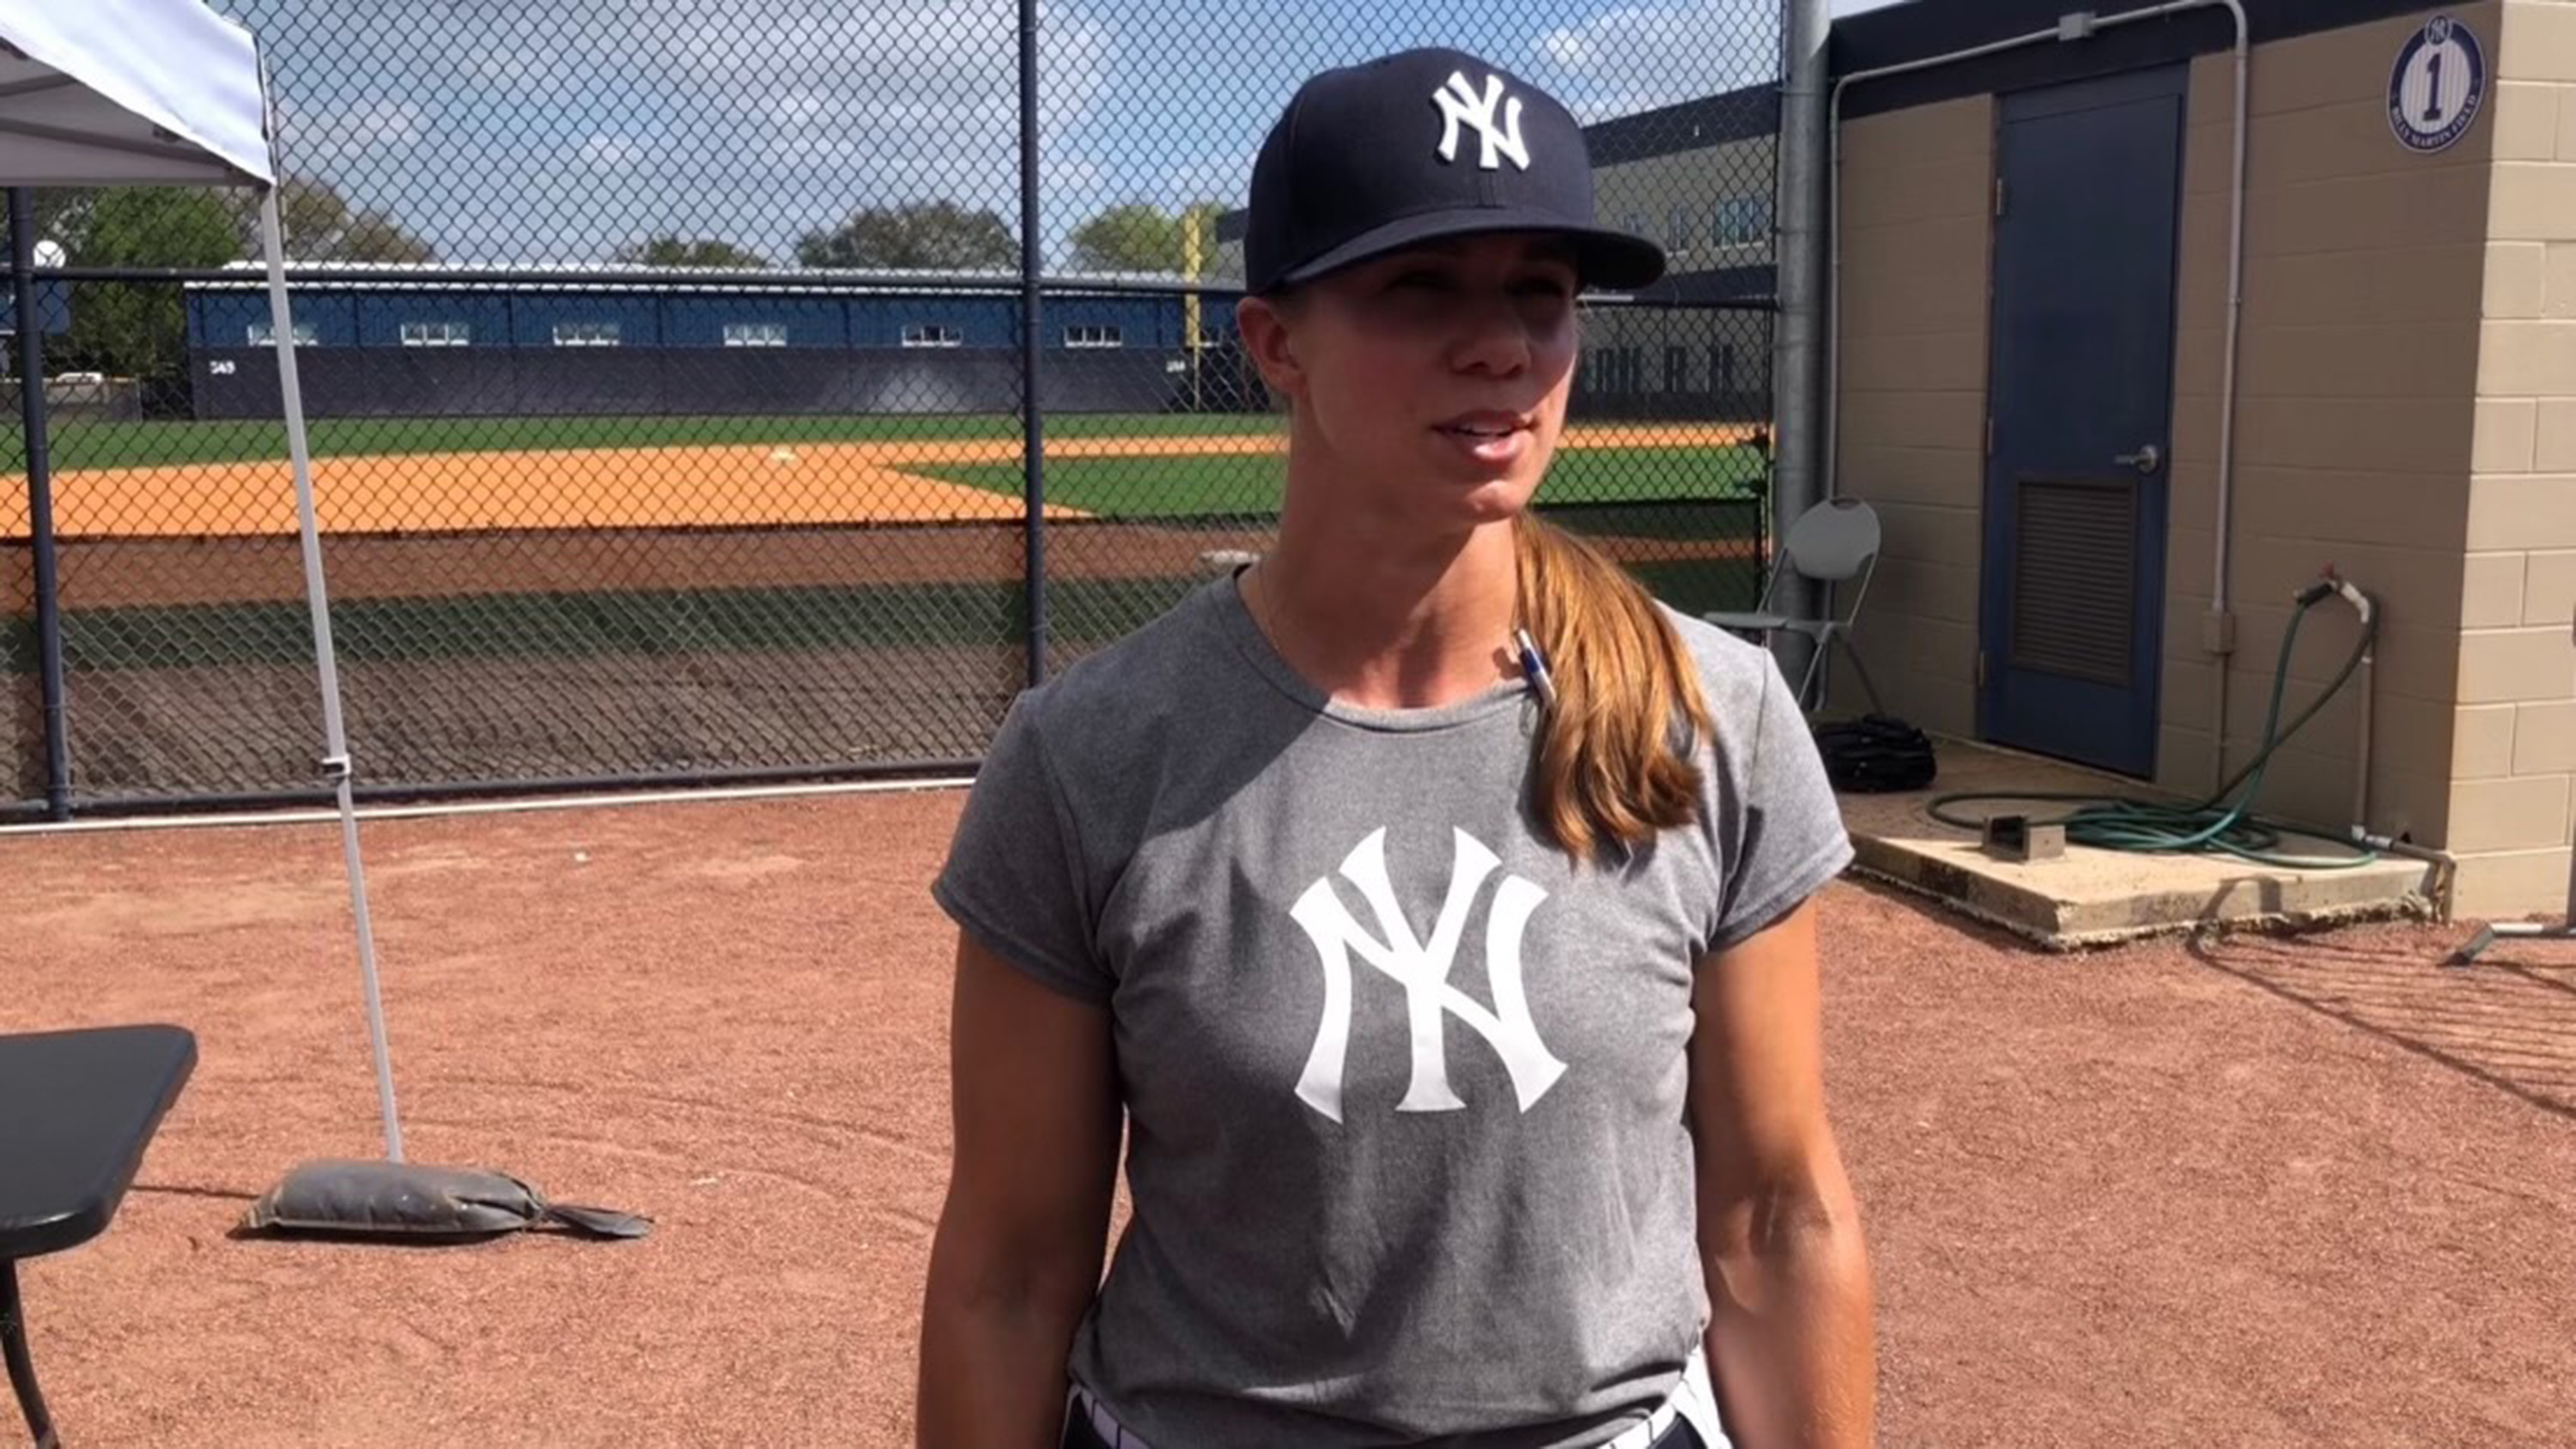 In a baseball first, New York Yankees name a woman to manage minor